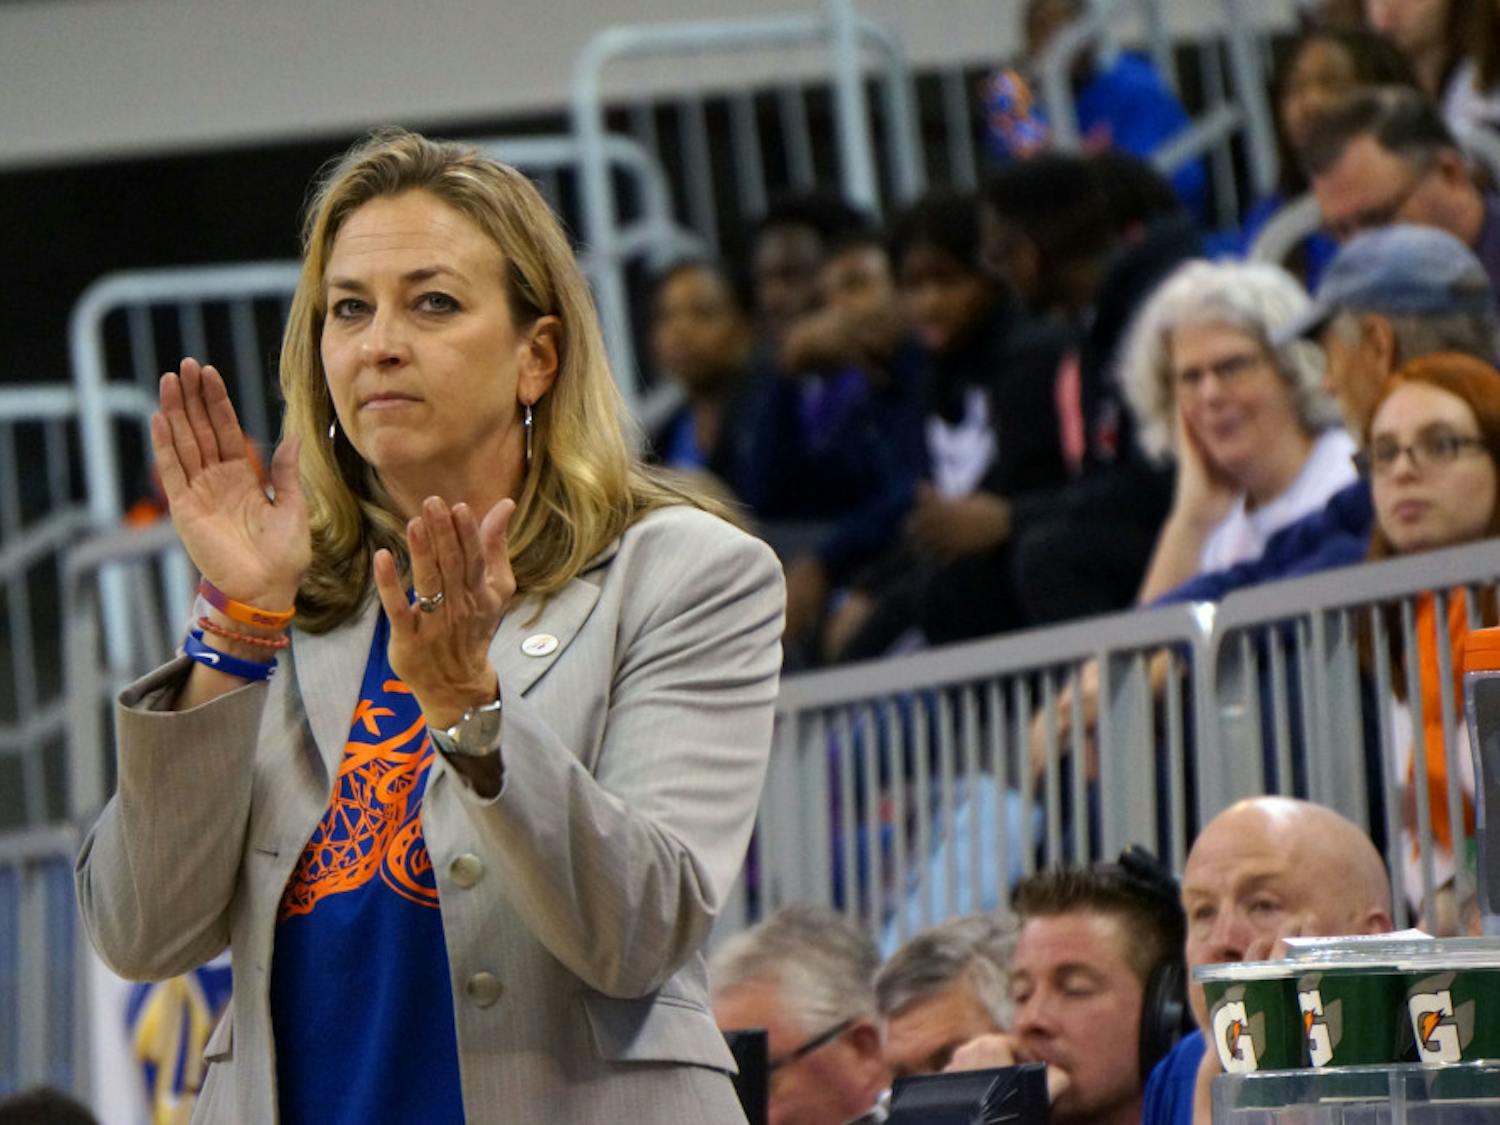 UF coach Amanda Butler claps during Florida's 53-45 win against LSU on Jan. 17, 2016, in the O'Connell Center.